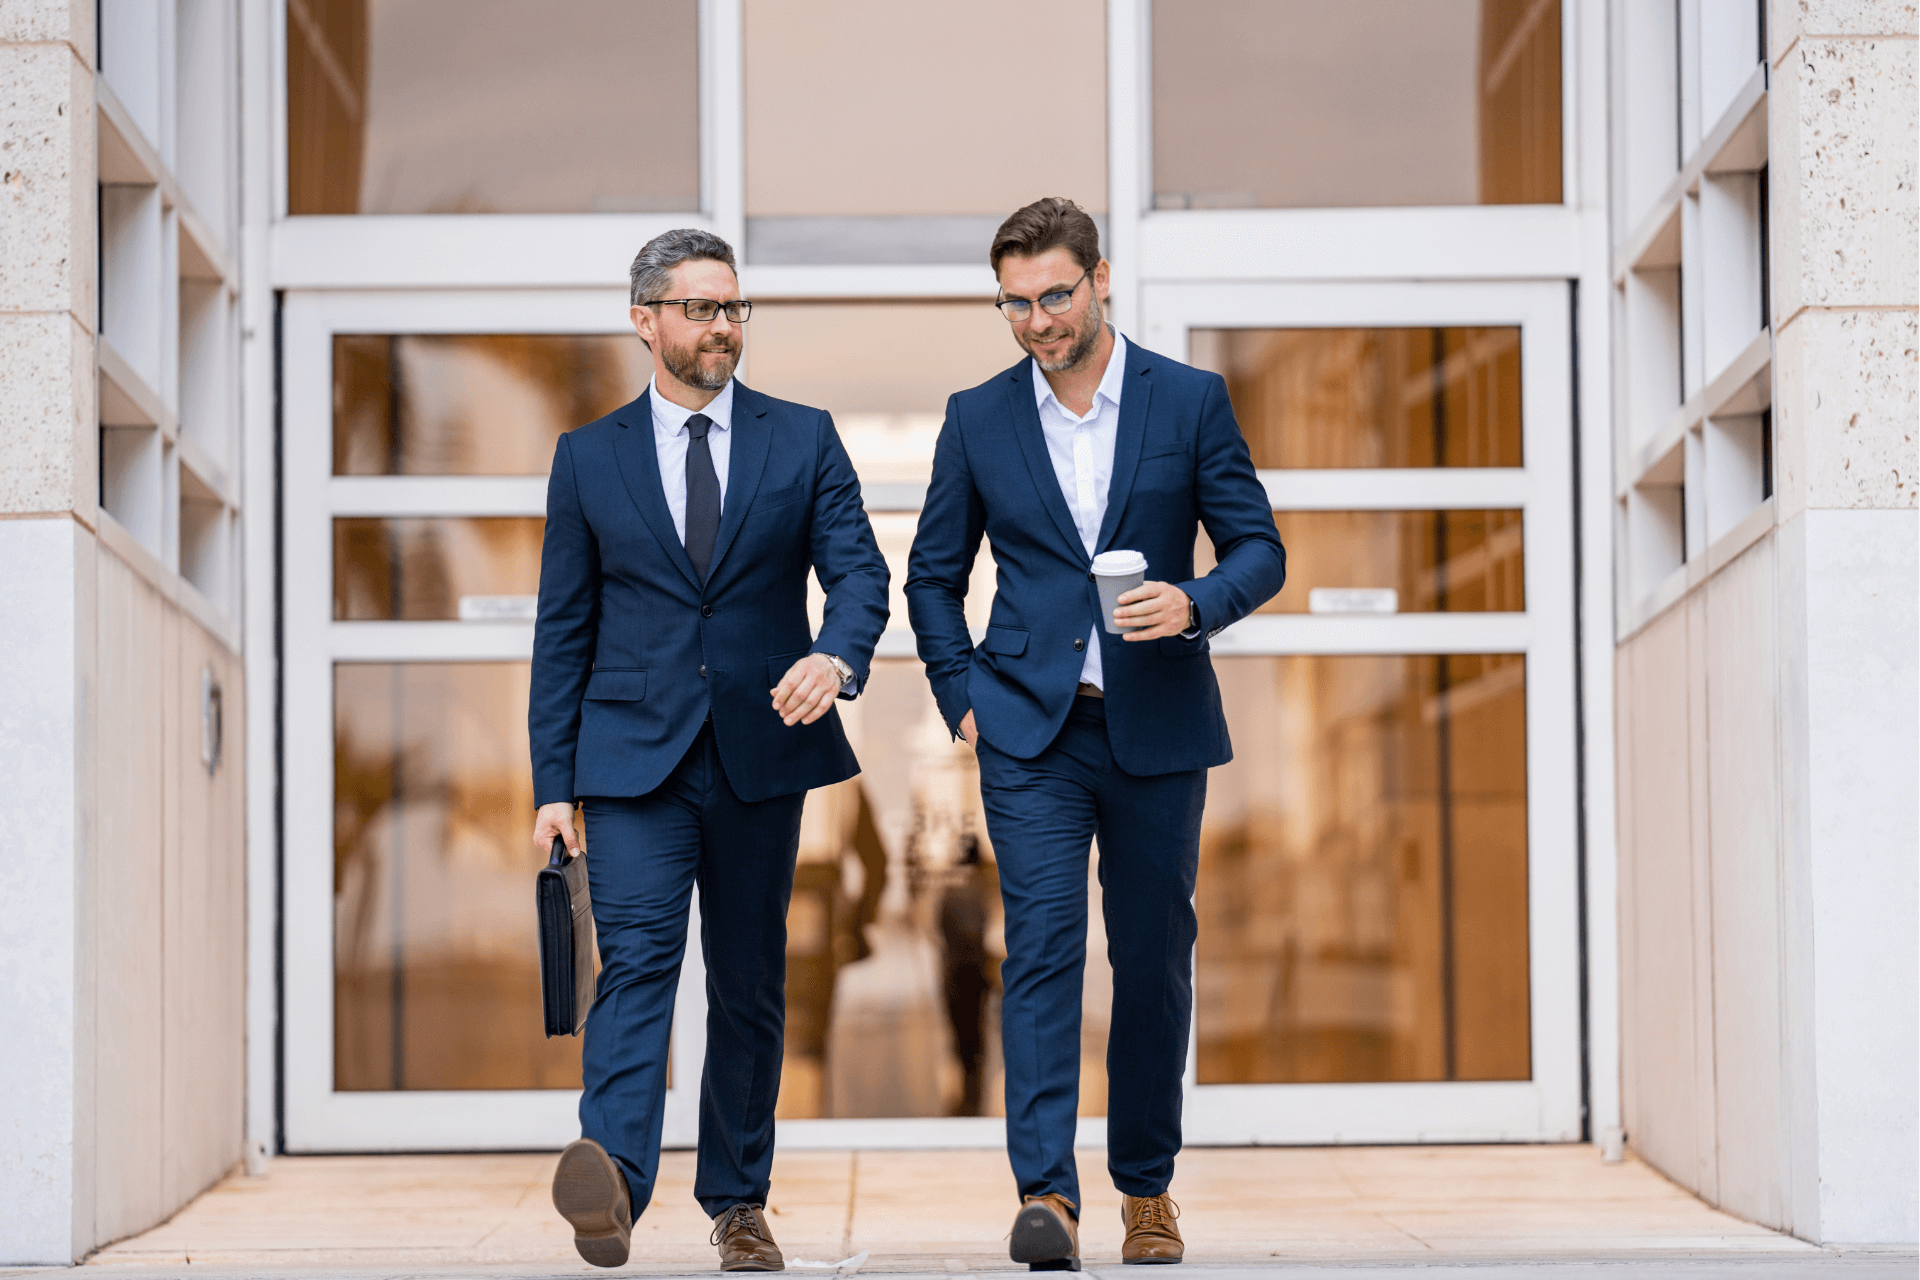 Business men walking out of a building